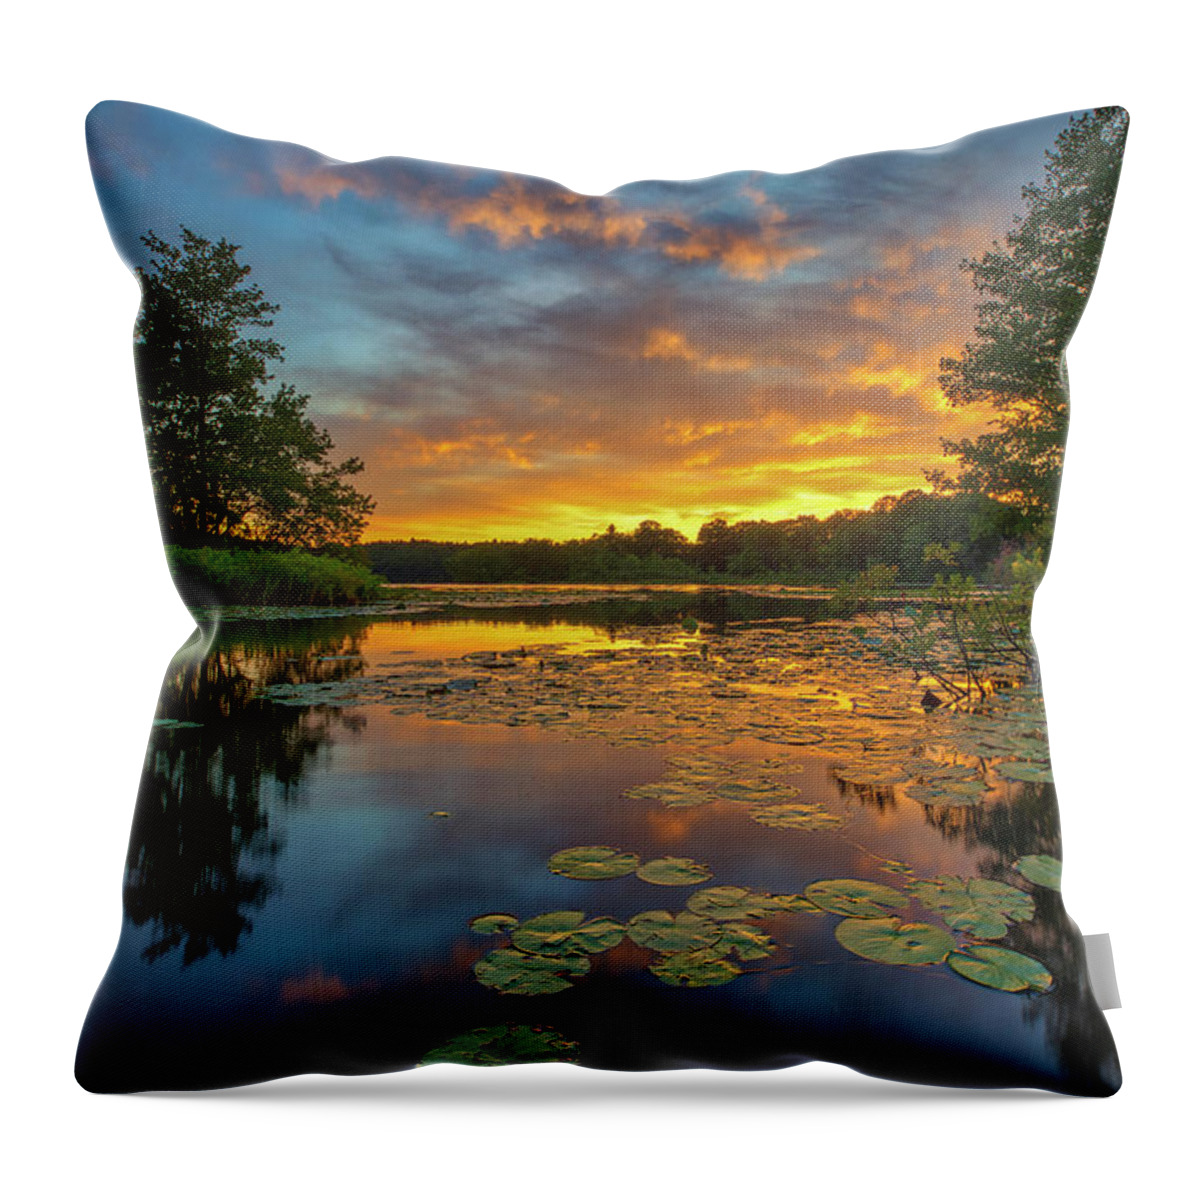 Water Lily Pads Throw Pillow featuring the photograph Wellesley Lake Waban Sunset by Juergen Roth